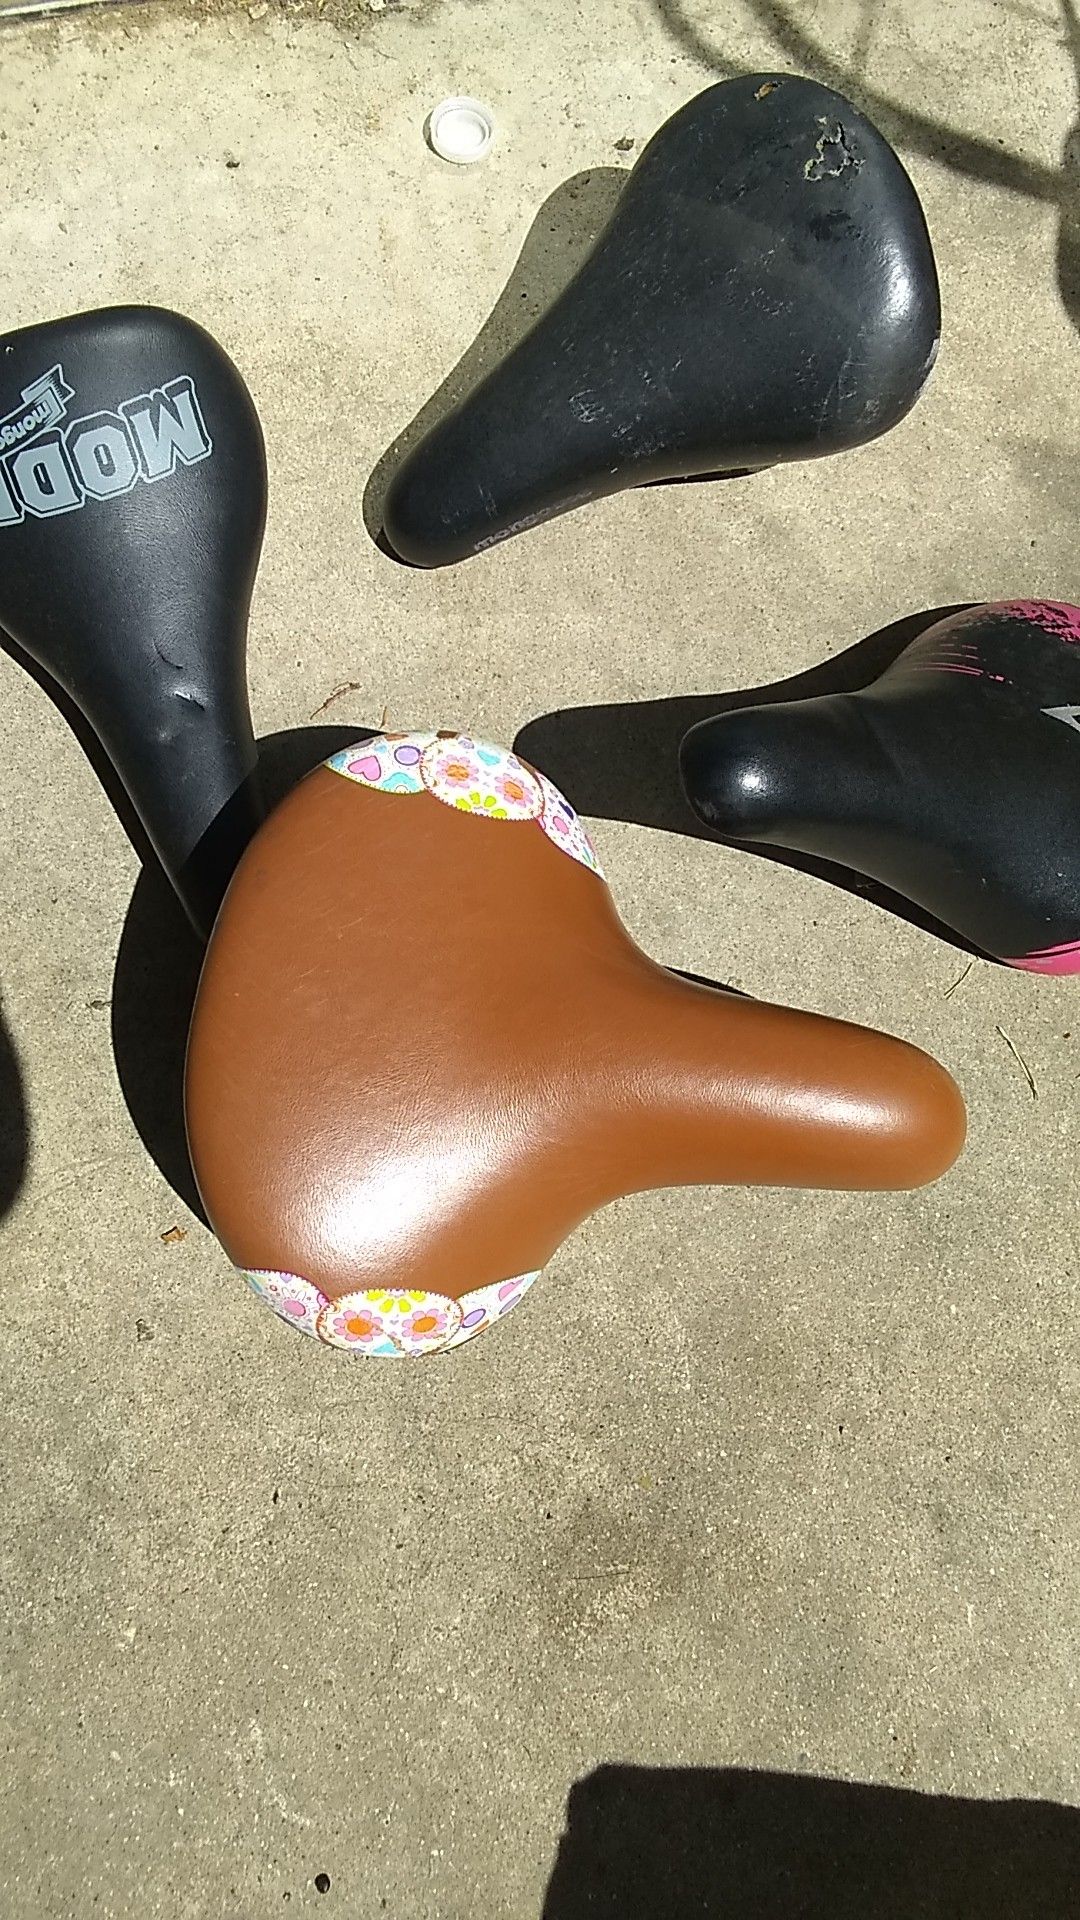 All size of bike seat s